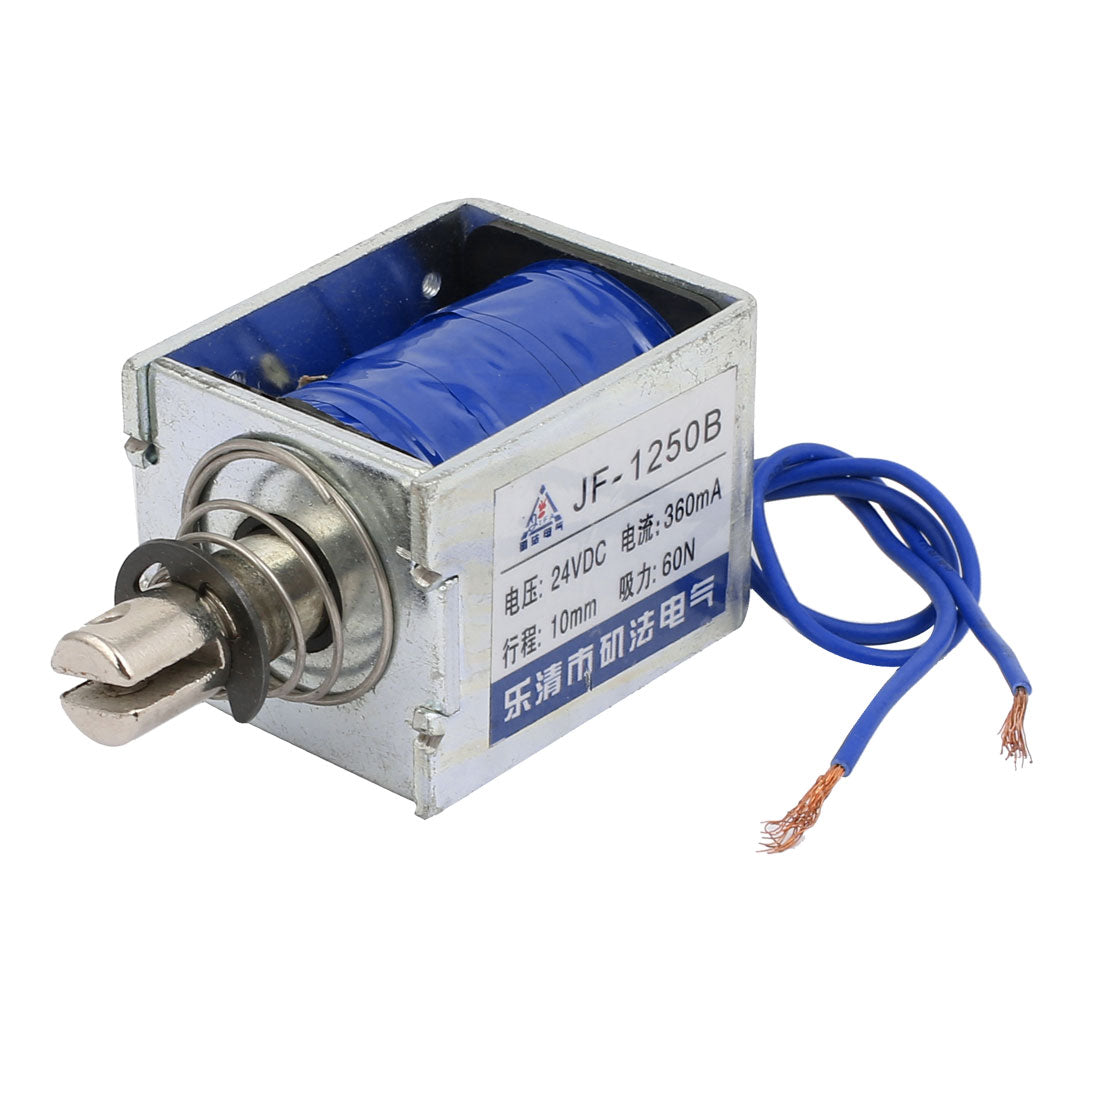 uxcell Uxcell JF-1250B DC 24V 360mA 60N Pull Push Type Open Frame Solenoid Electromagnet